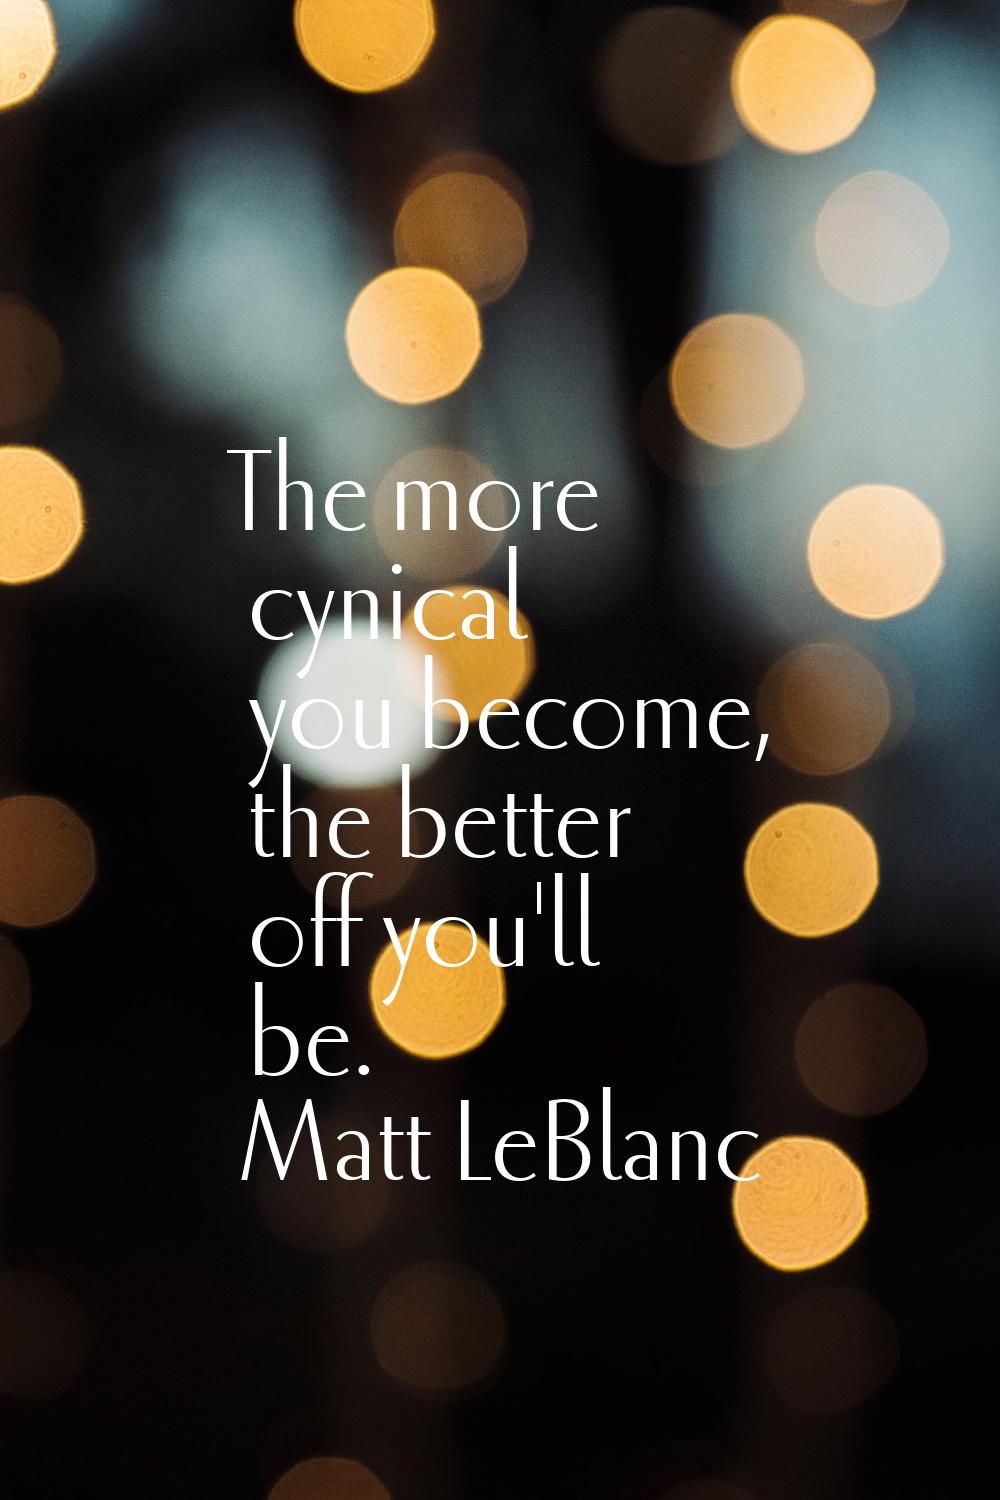 The more cynical you become, the better off you'll be.